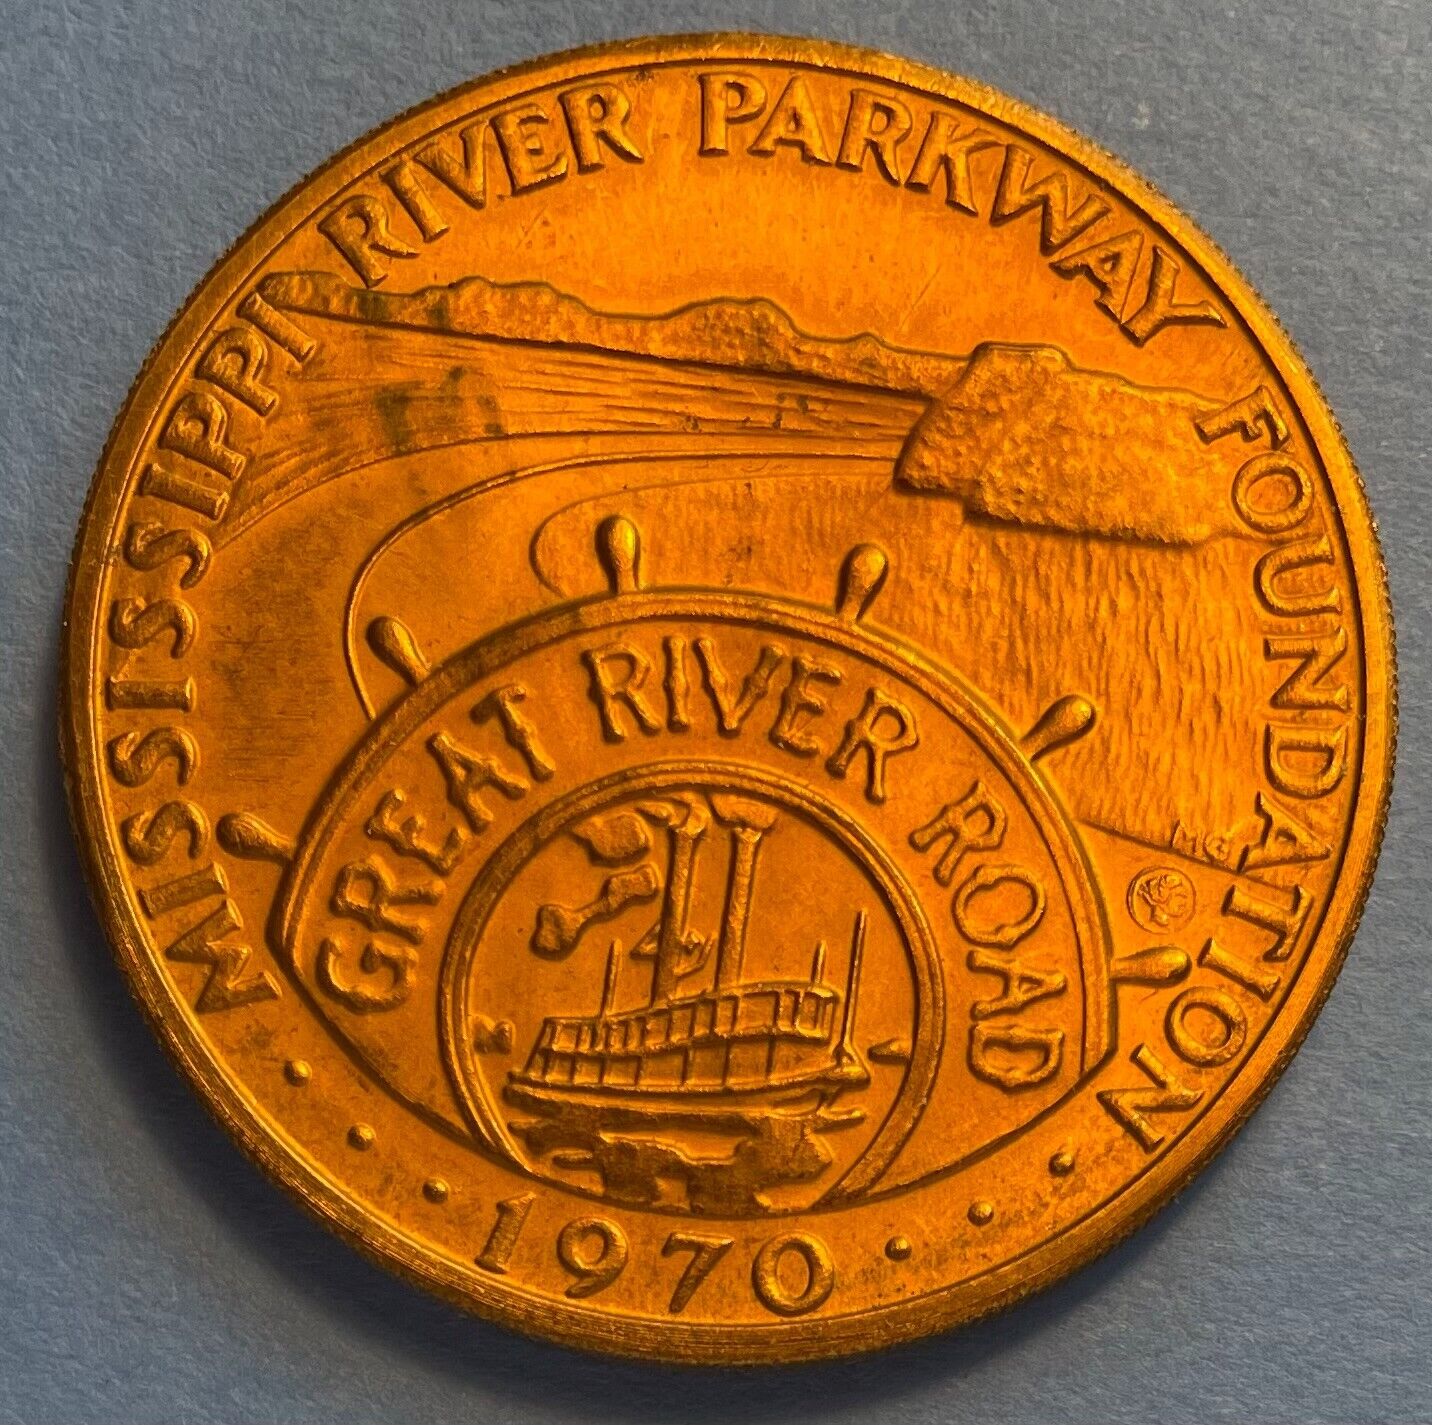 1970 Great River Road Commemorative Token Coin--Mississippi River Parkway